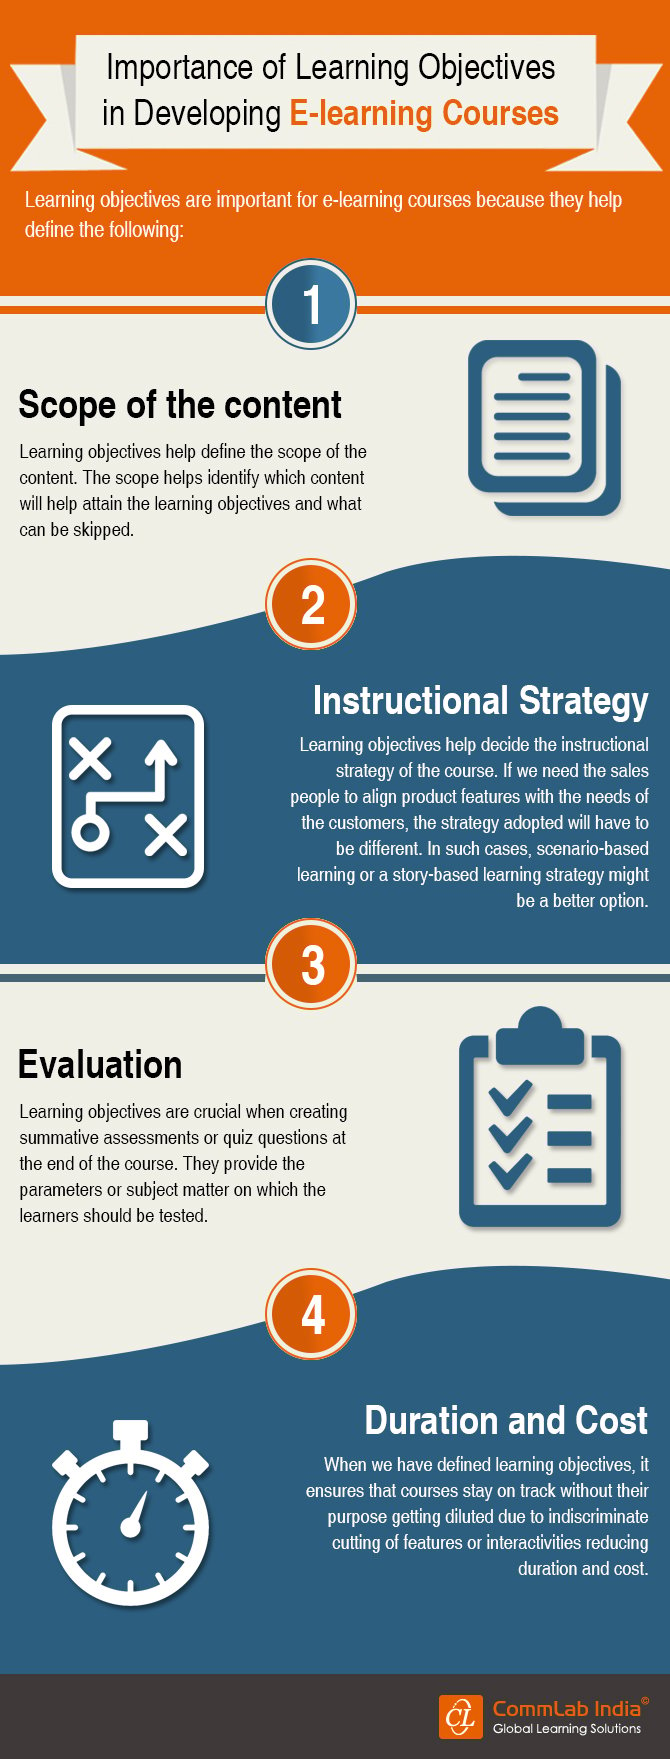 The Importance of Learning Objectives in Developing E-learning Courses [Infographic]